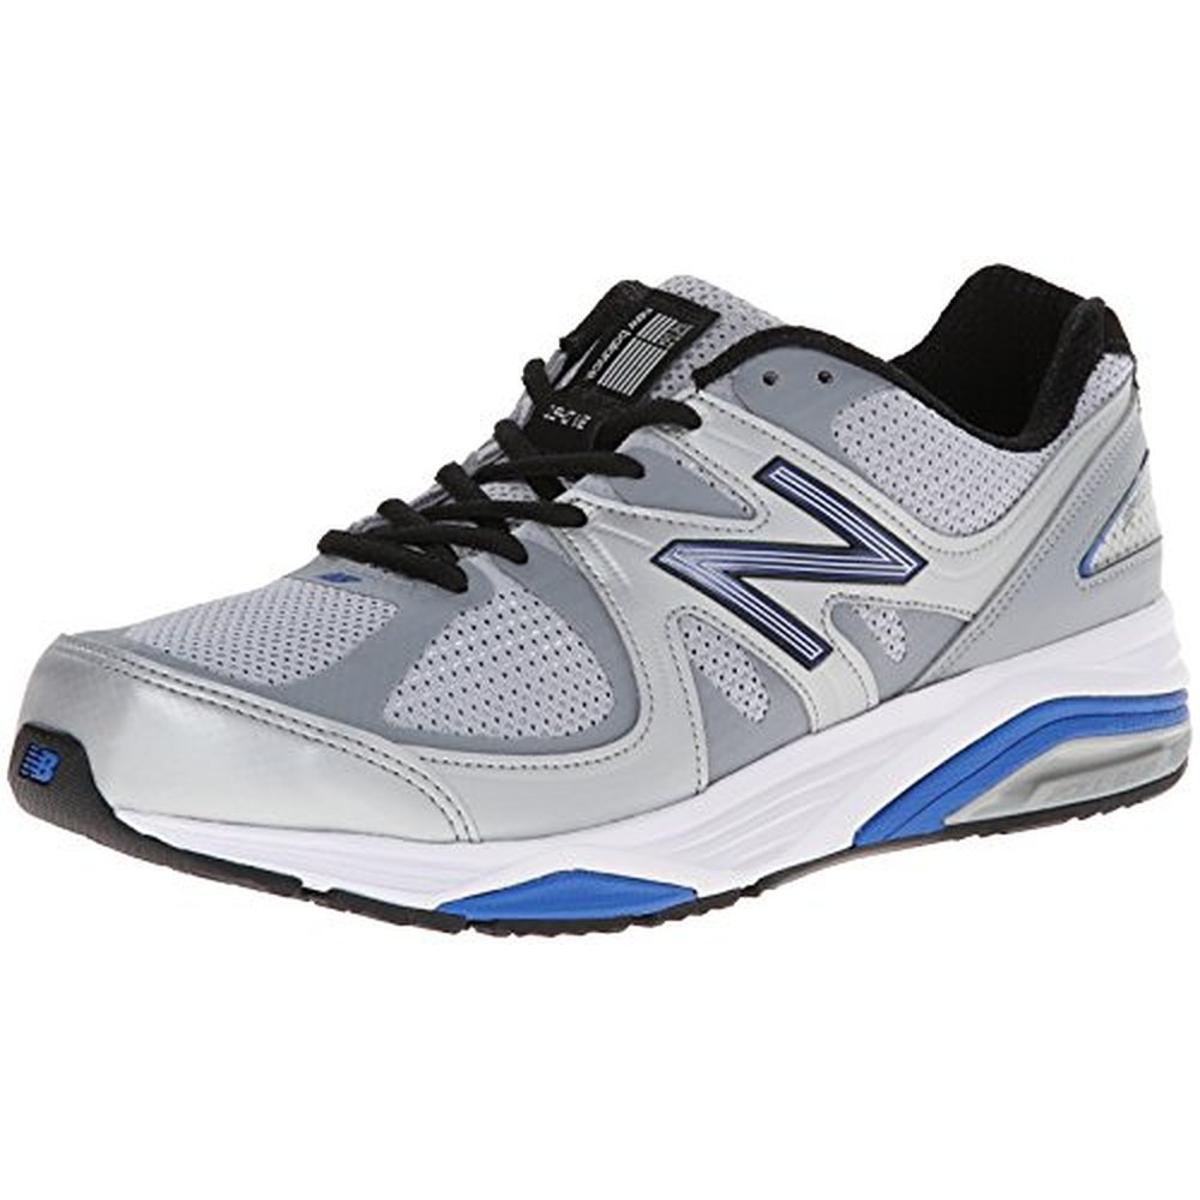 New Balance Mens 1540v2 Mesh Athletic Signature Running Shoes Sneakers ...